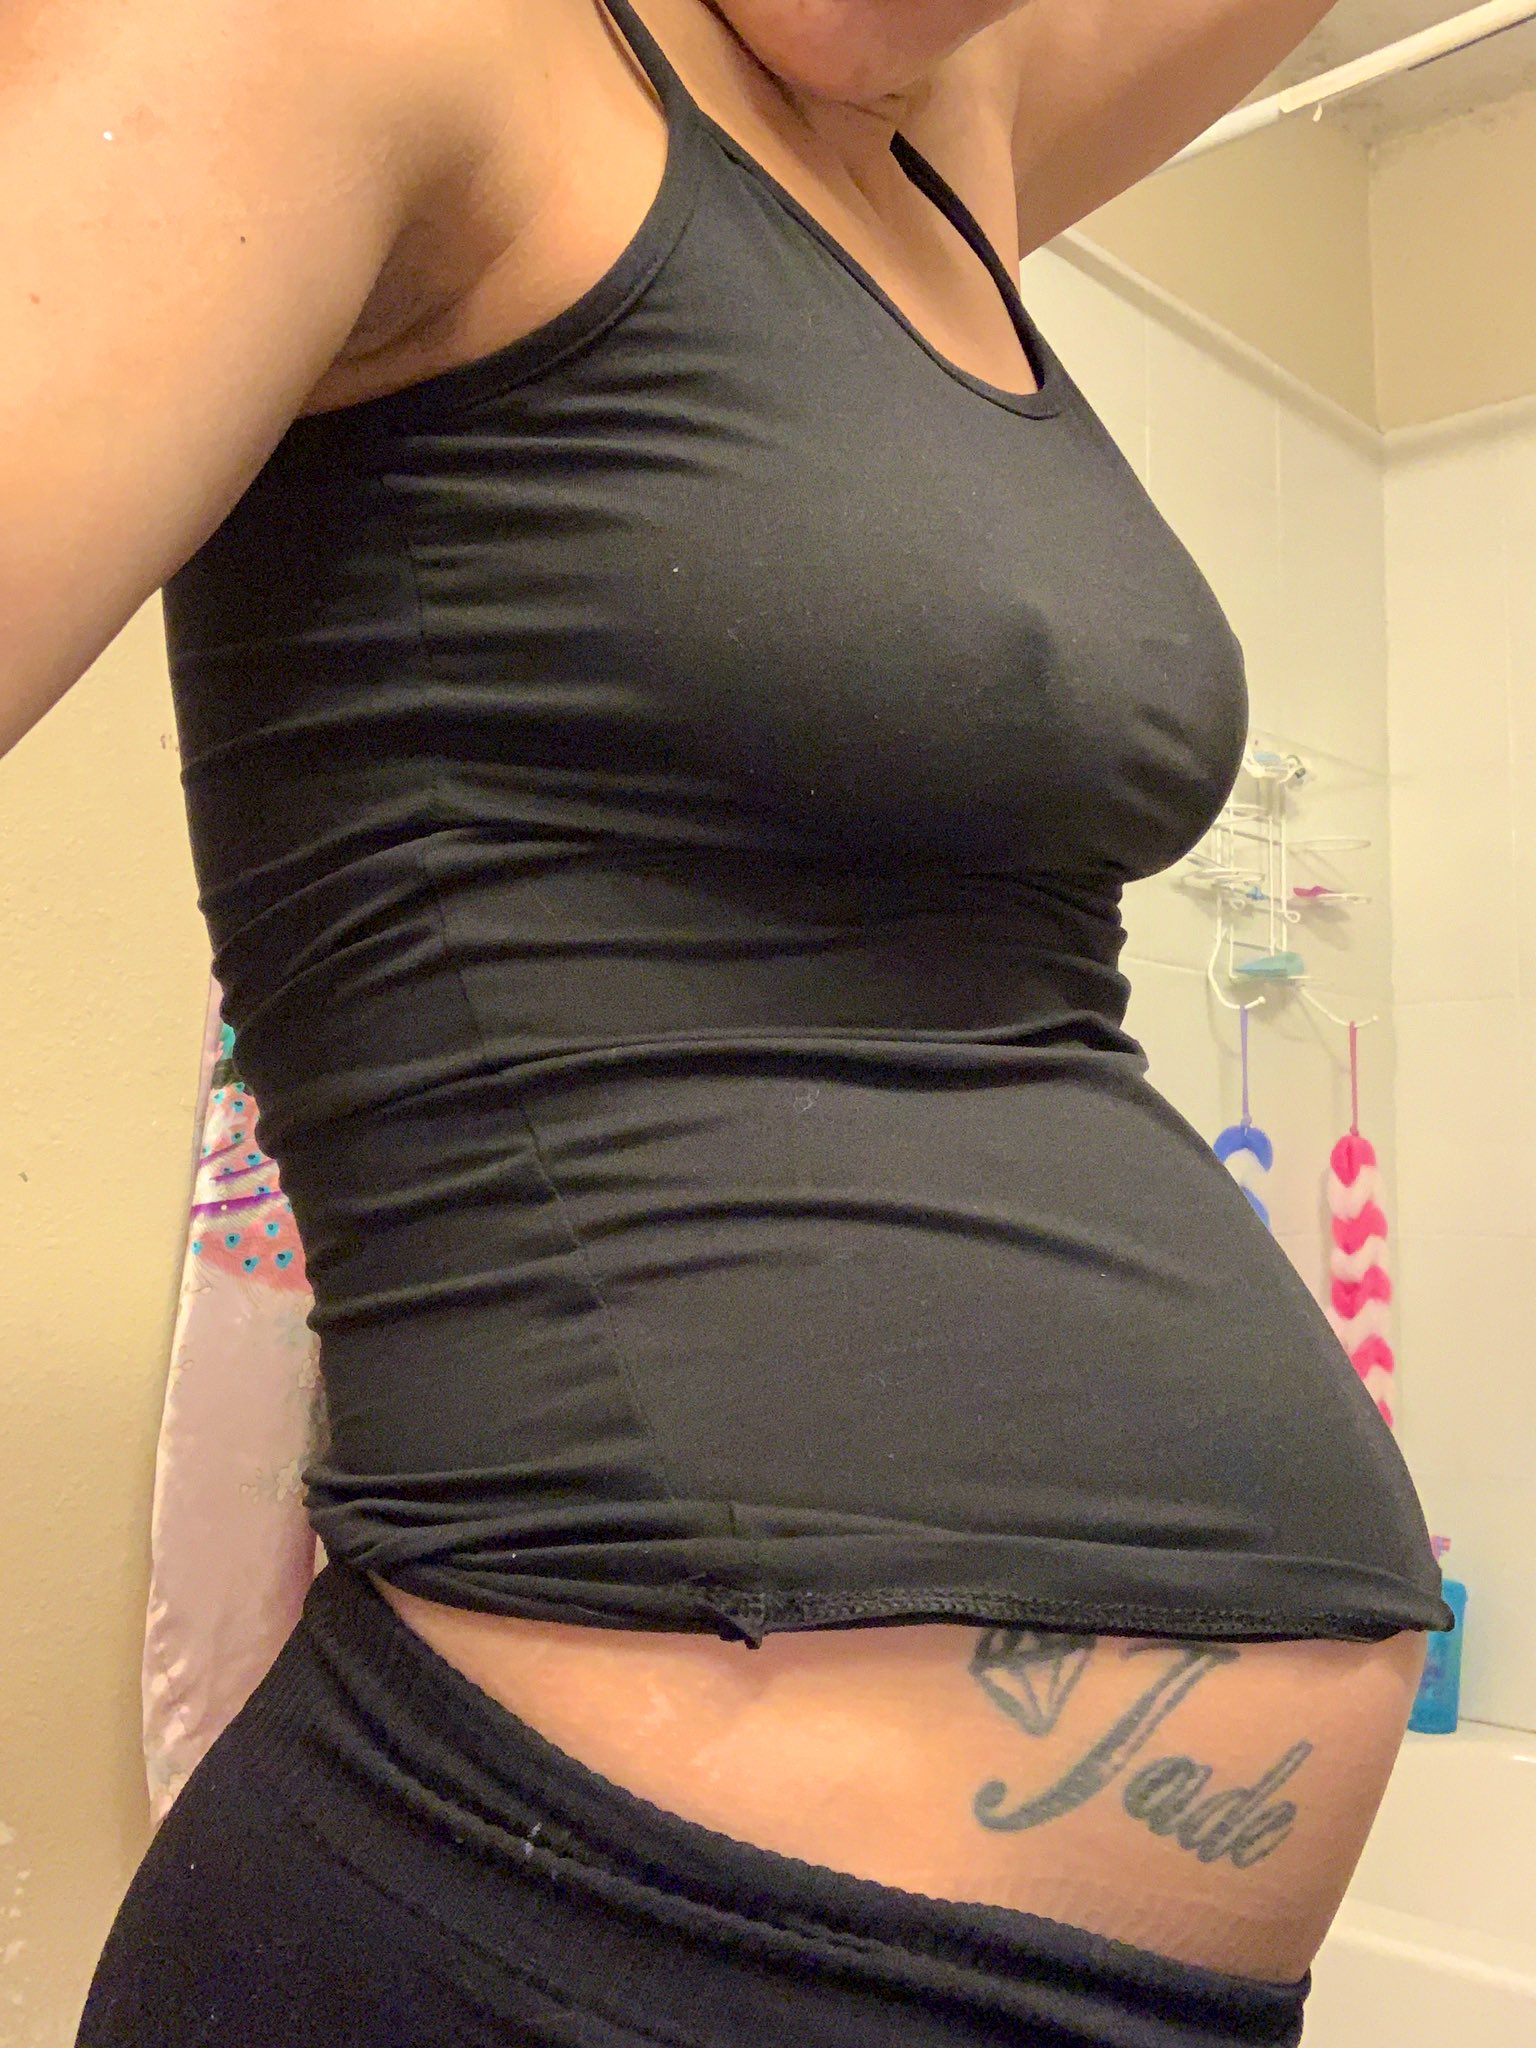 1 pic. 12 weeks.... we got a long way to go TWINS https://t.co/h1QvddLPJA